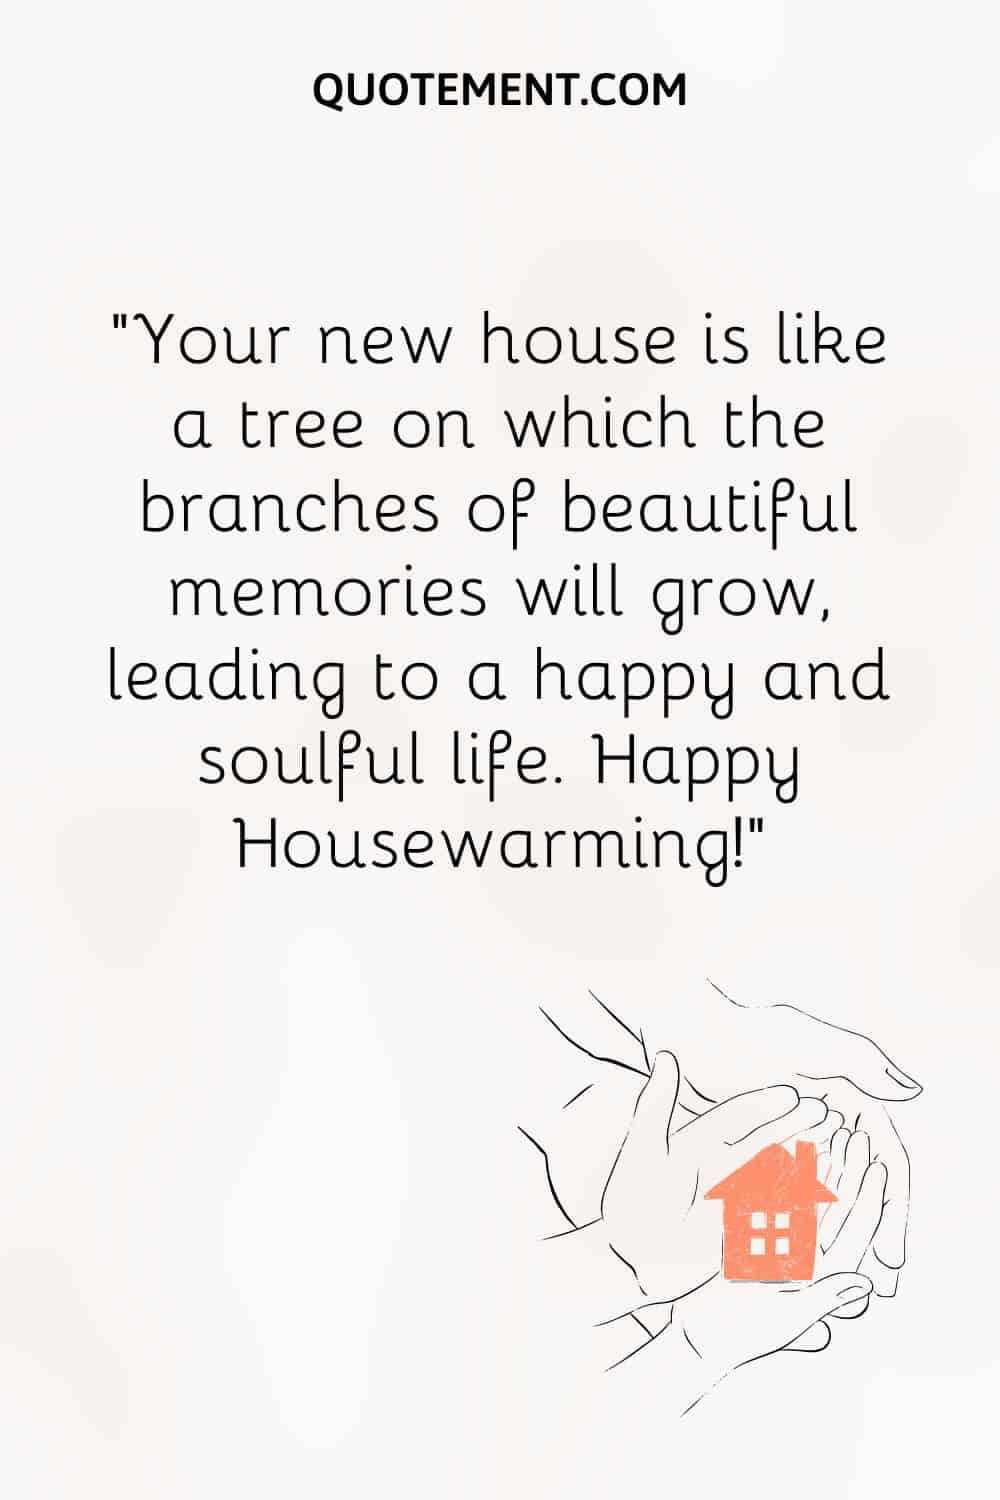 Your new house is like a tree on which the branches of beautiful memories will grow, leading to a happy and soulful life.